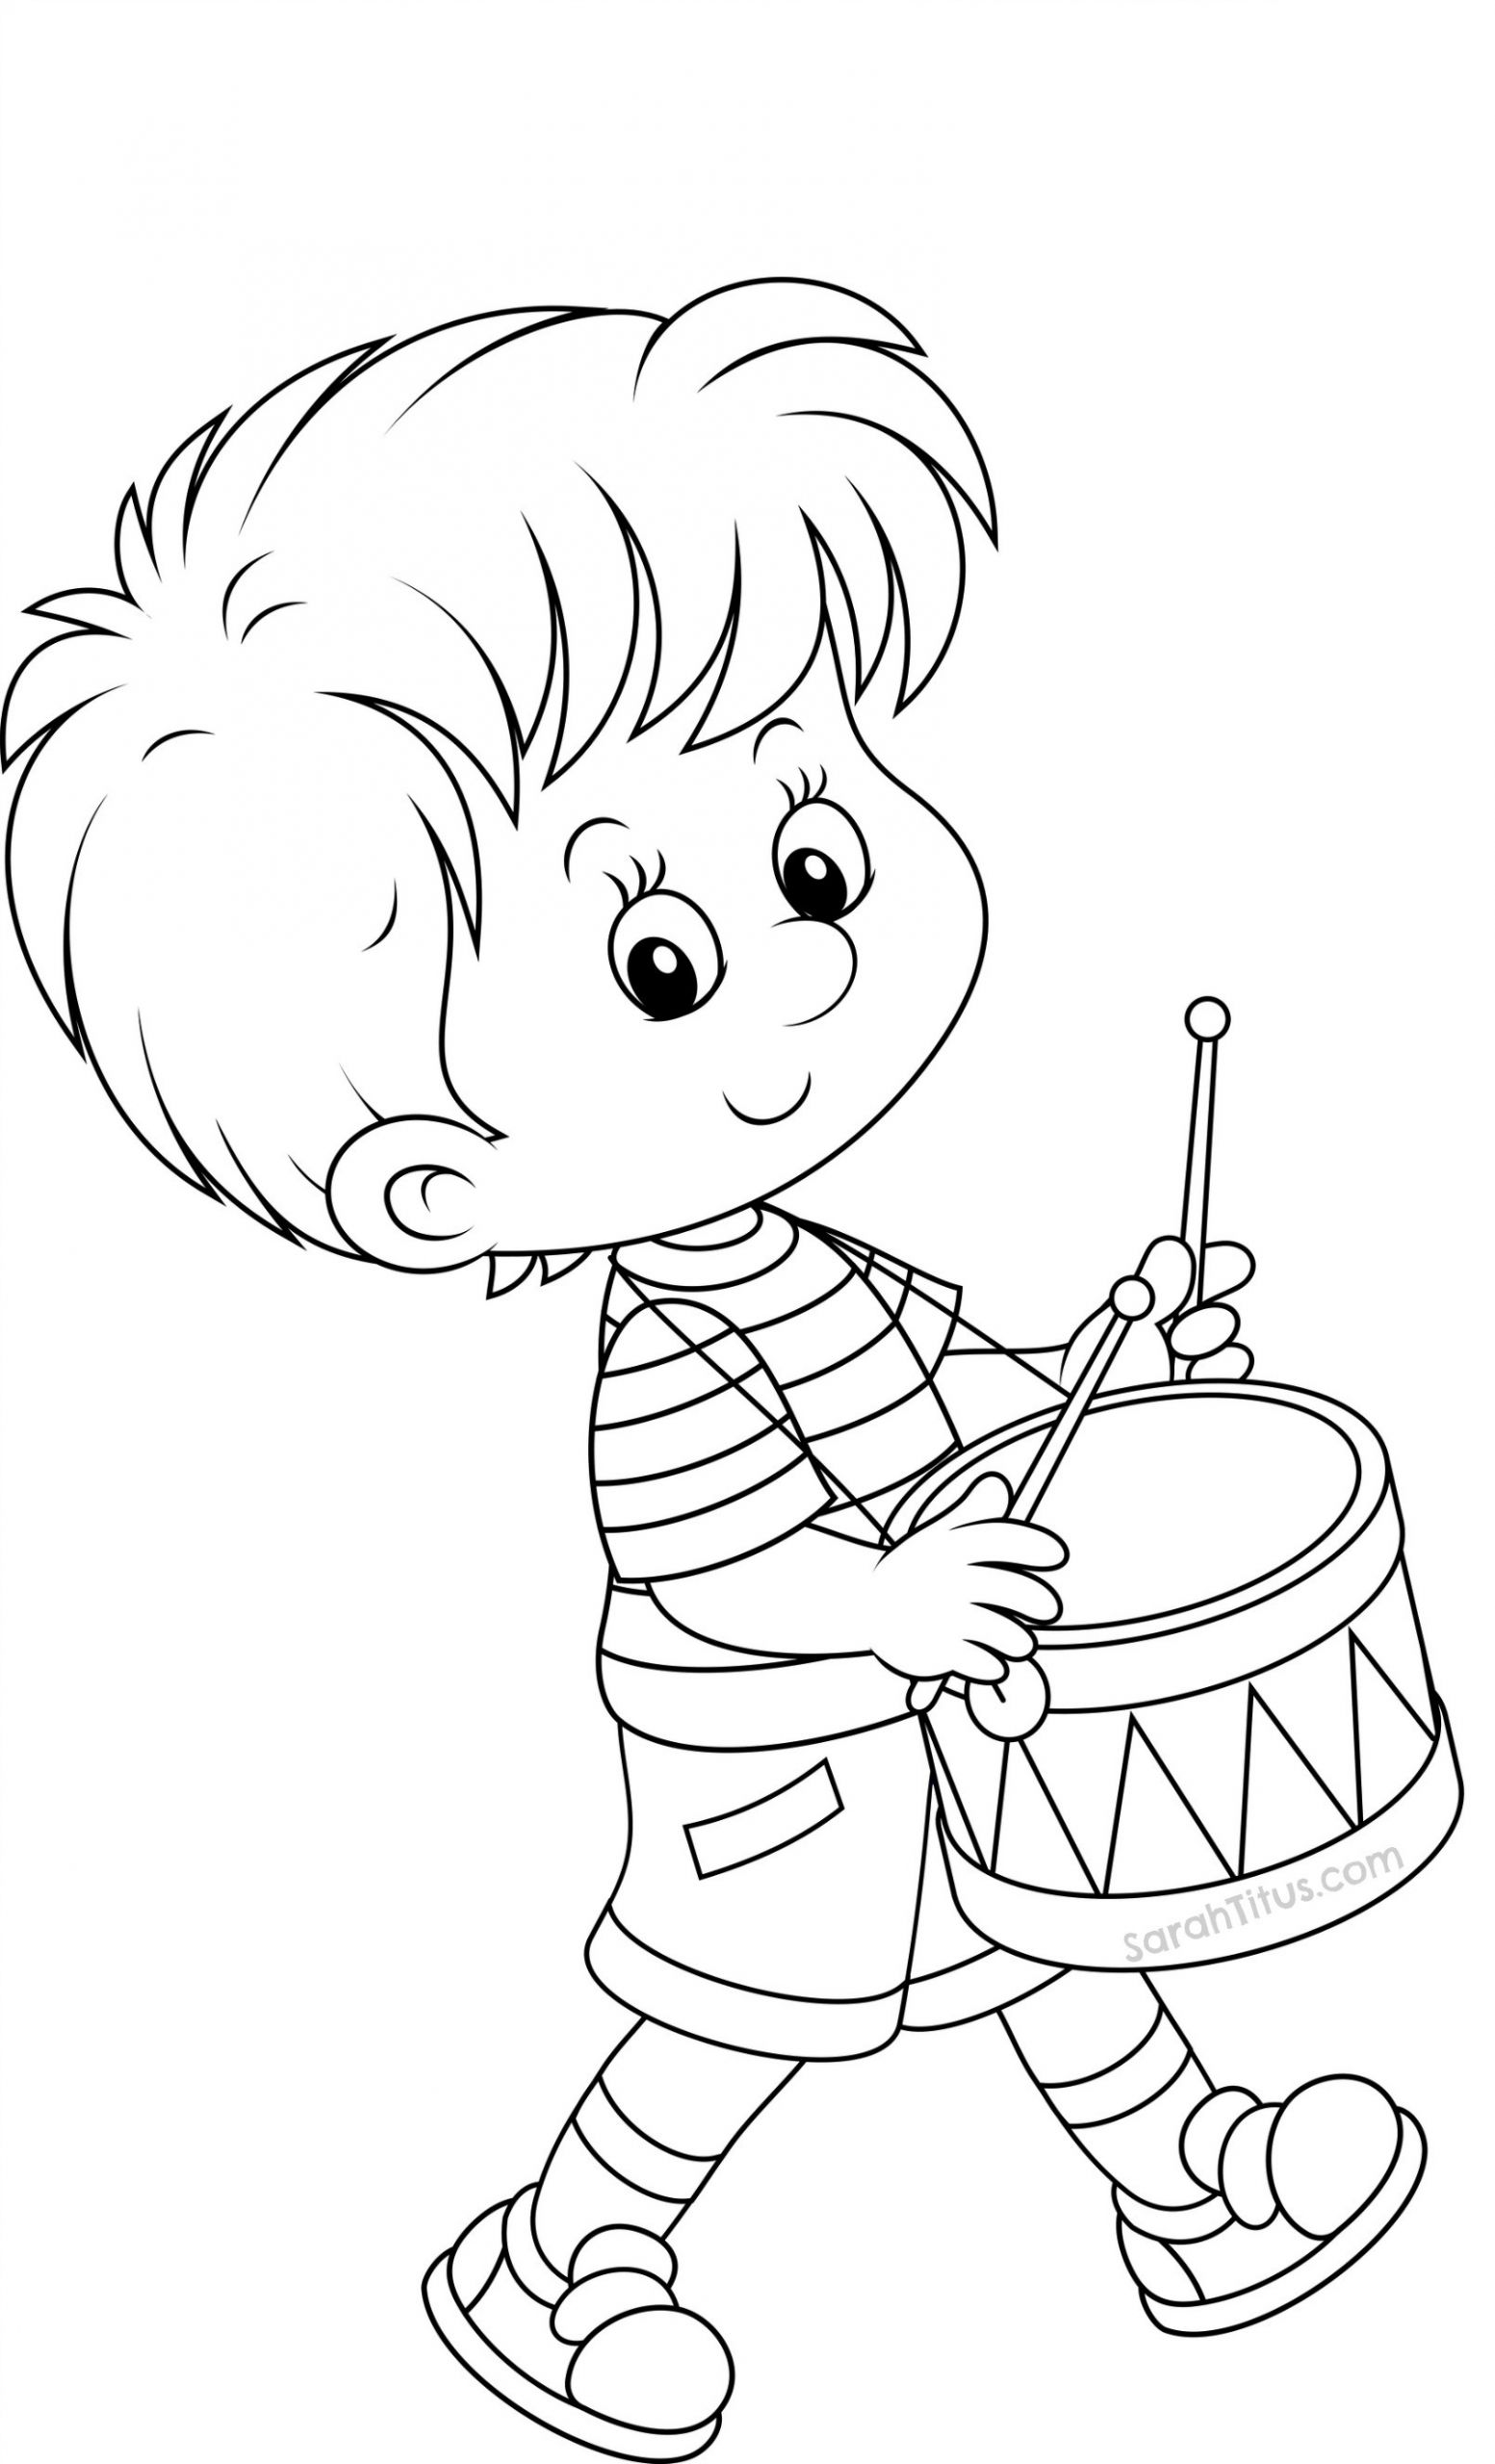 Coloring Pages For Little Boys
 Back to School Coloring Pages Sarah Titus